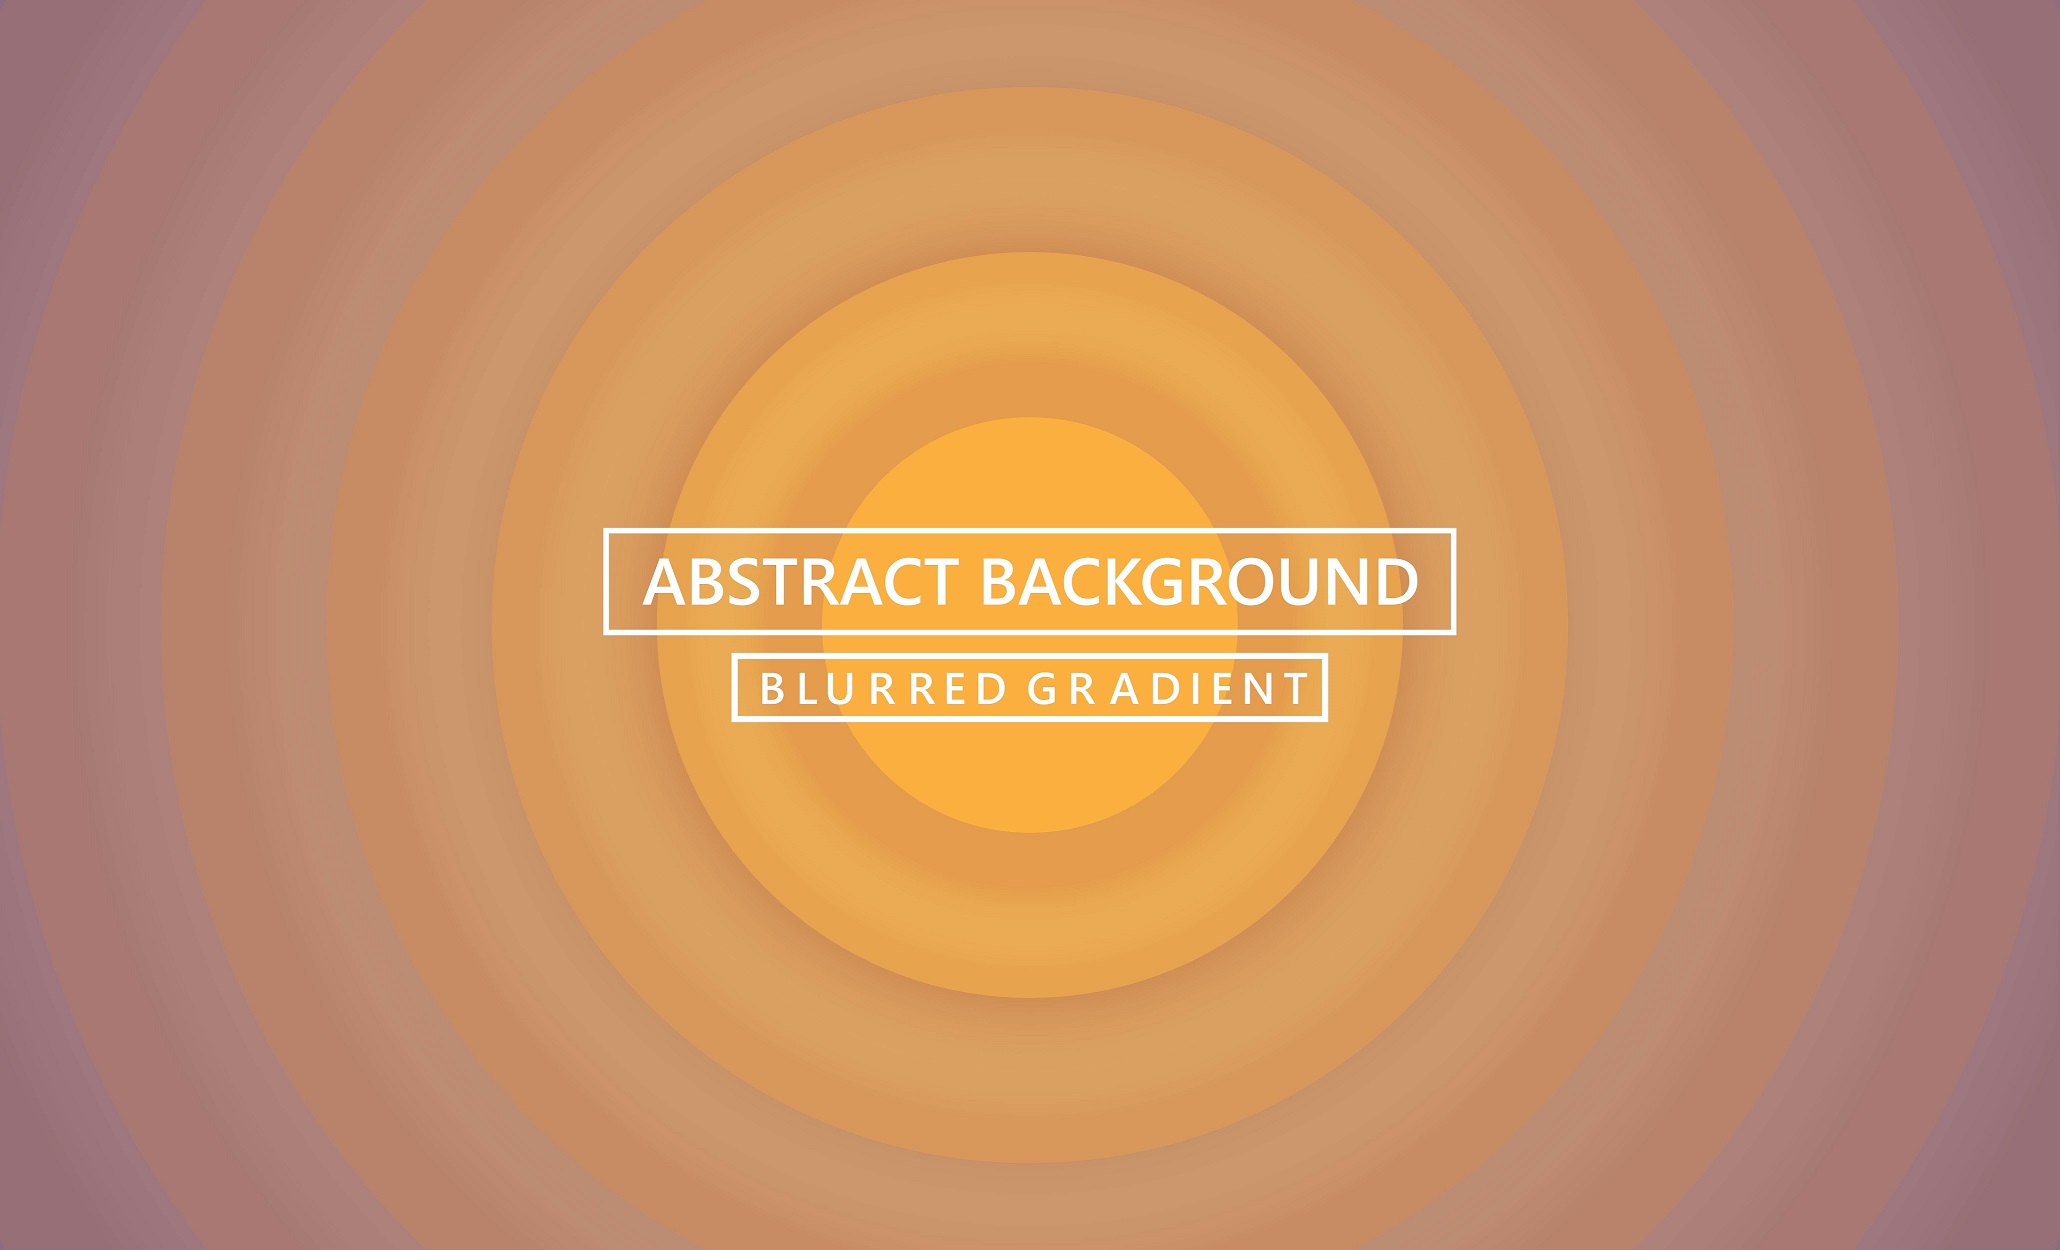 Abstract blurred gradient mesh background vector pinterest preview image.